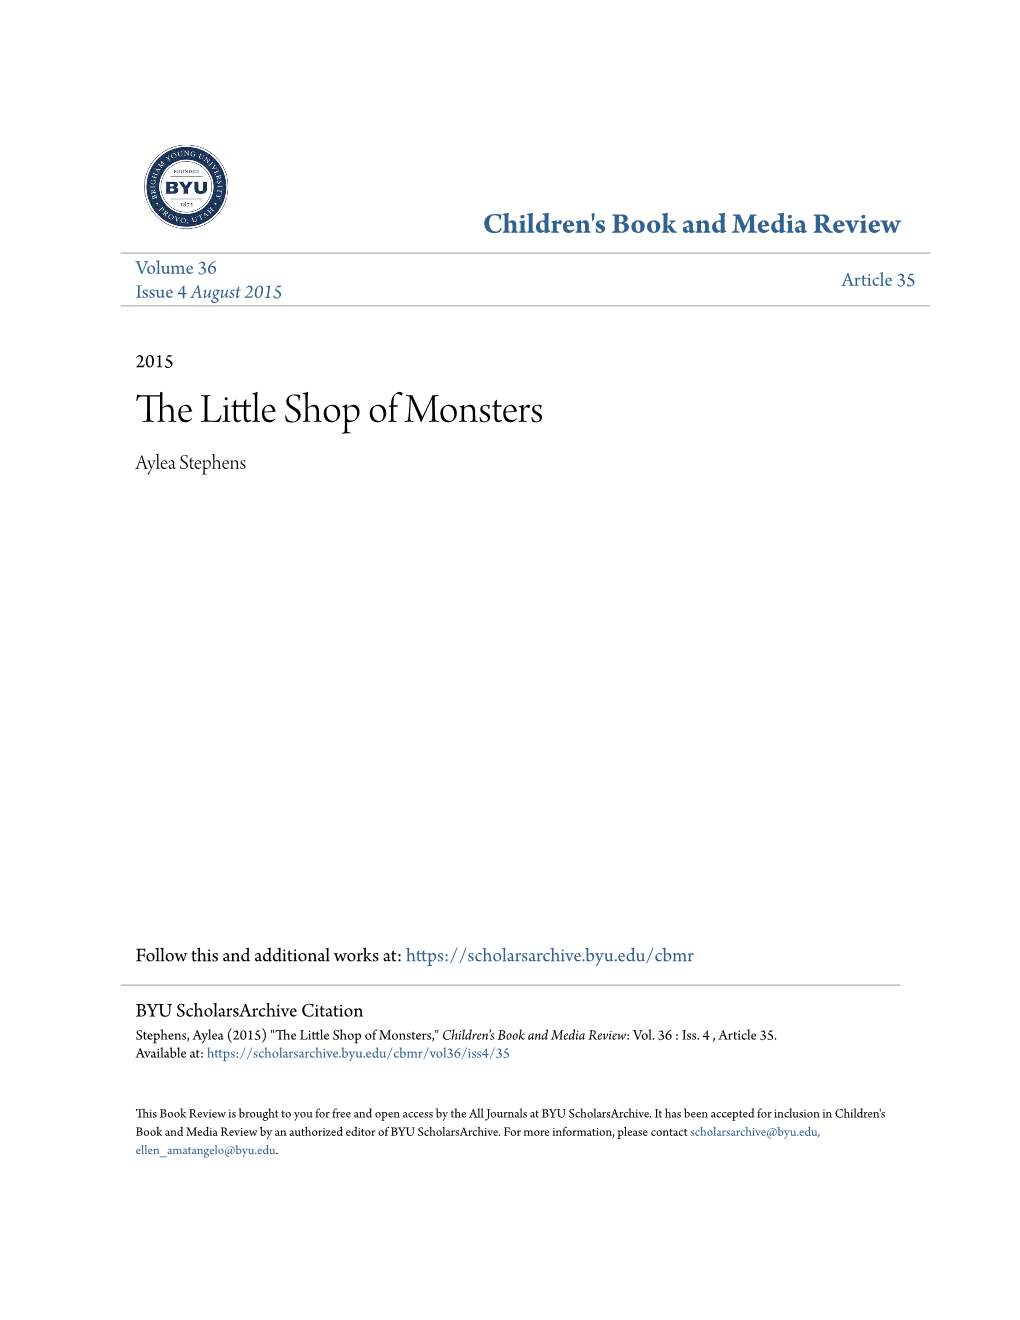 The Little Shop of Monsters Book Review